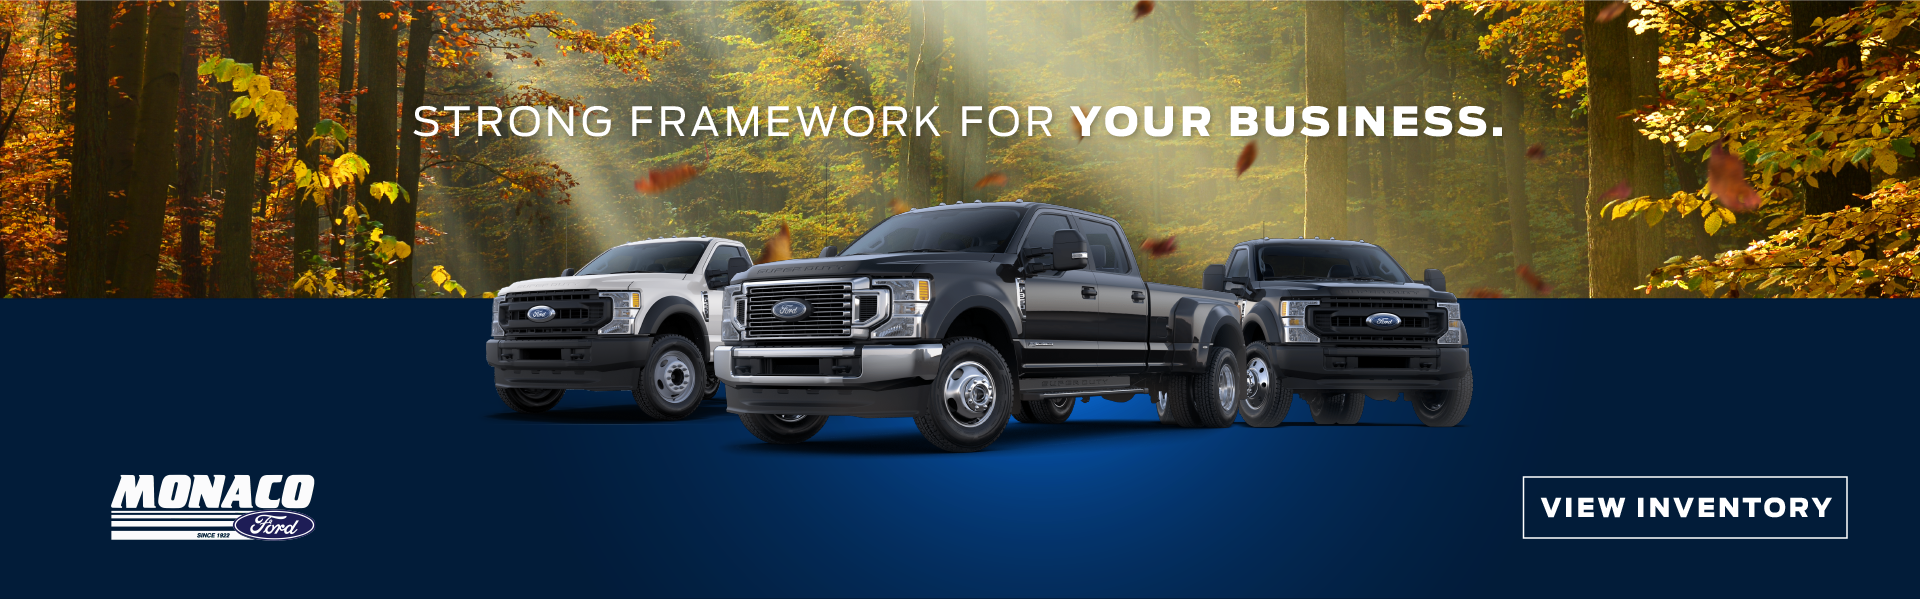 Choose Monaco Ford for your Commercial Truck Needs.